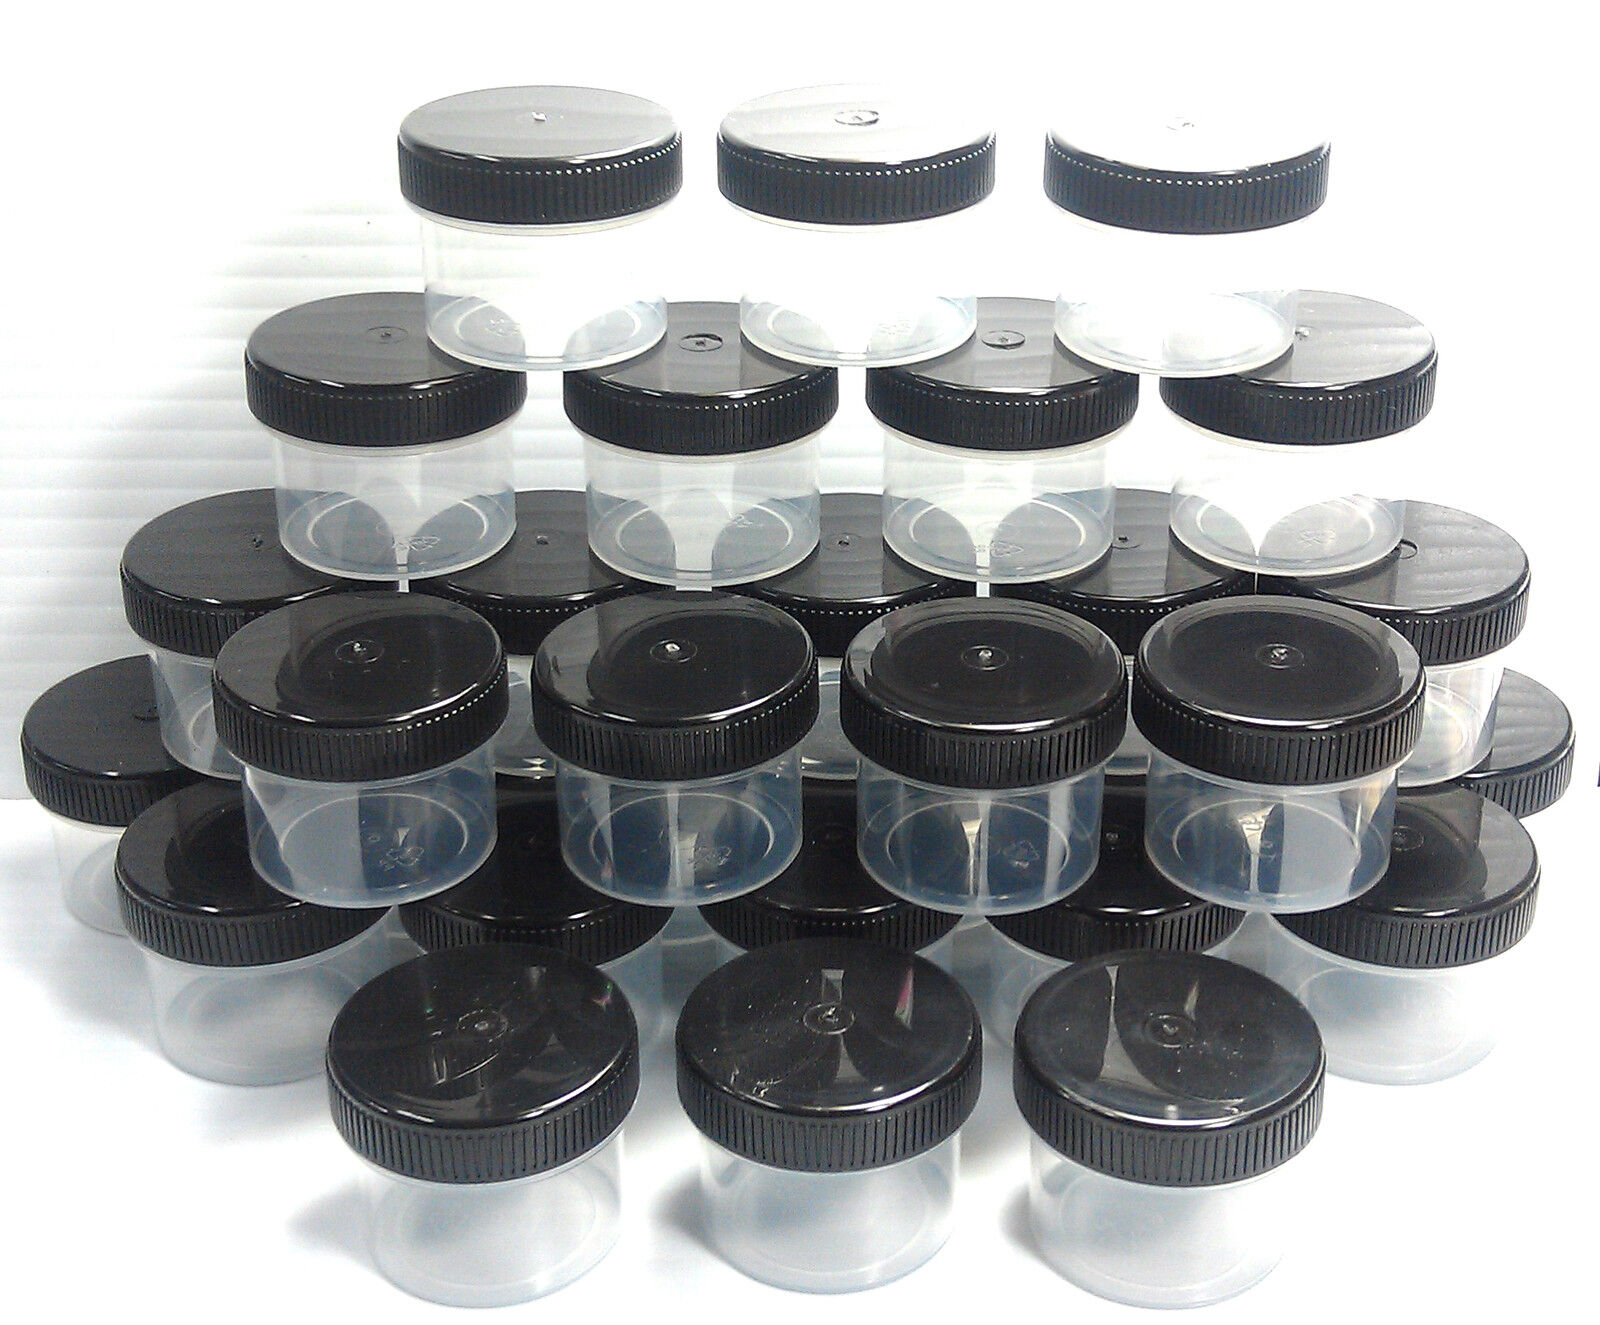 20 Small Plastic Jars 1 ounce Insect Bug Science Specimen Storage Container 4304 DecoJars 4304